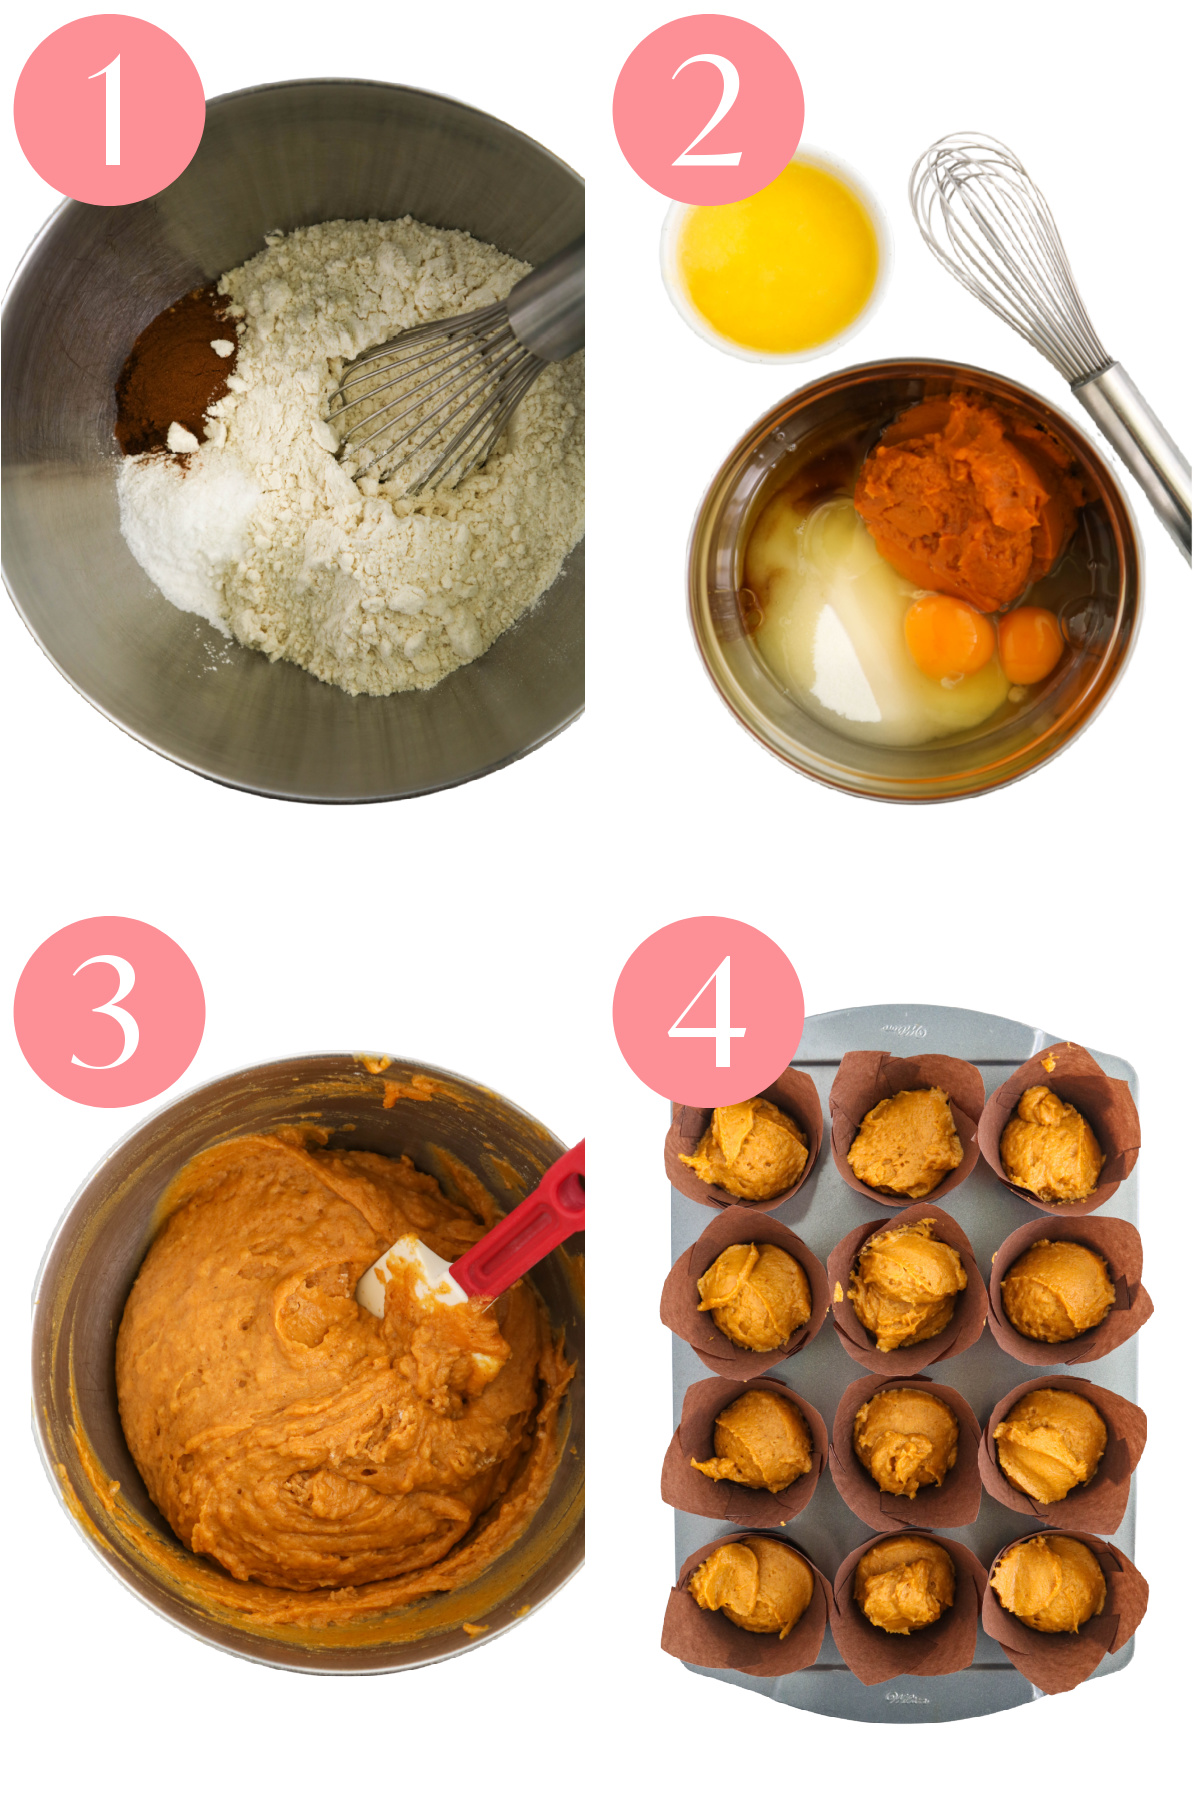 How to make this easy pumpkin muffin recipe. Step by step photos.